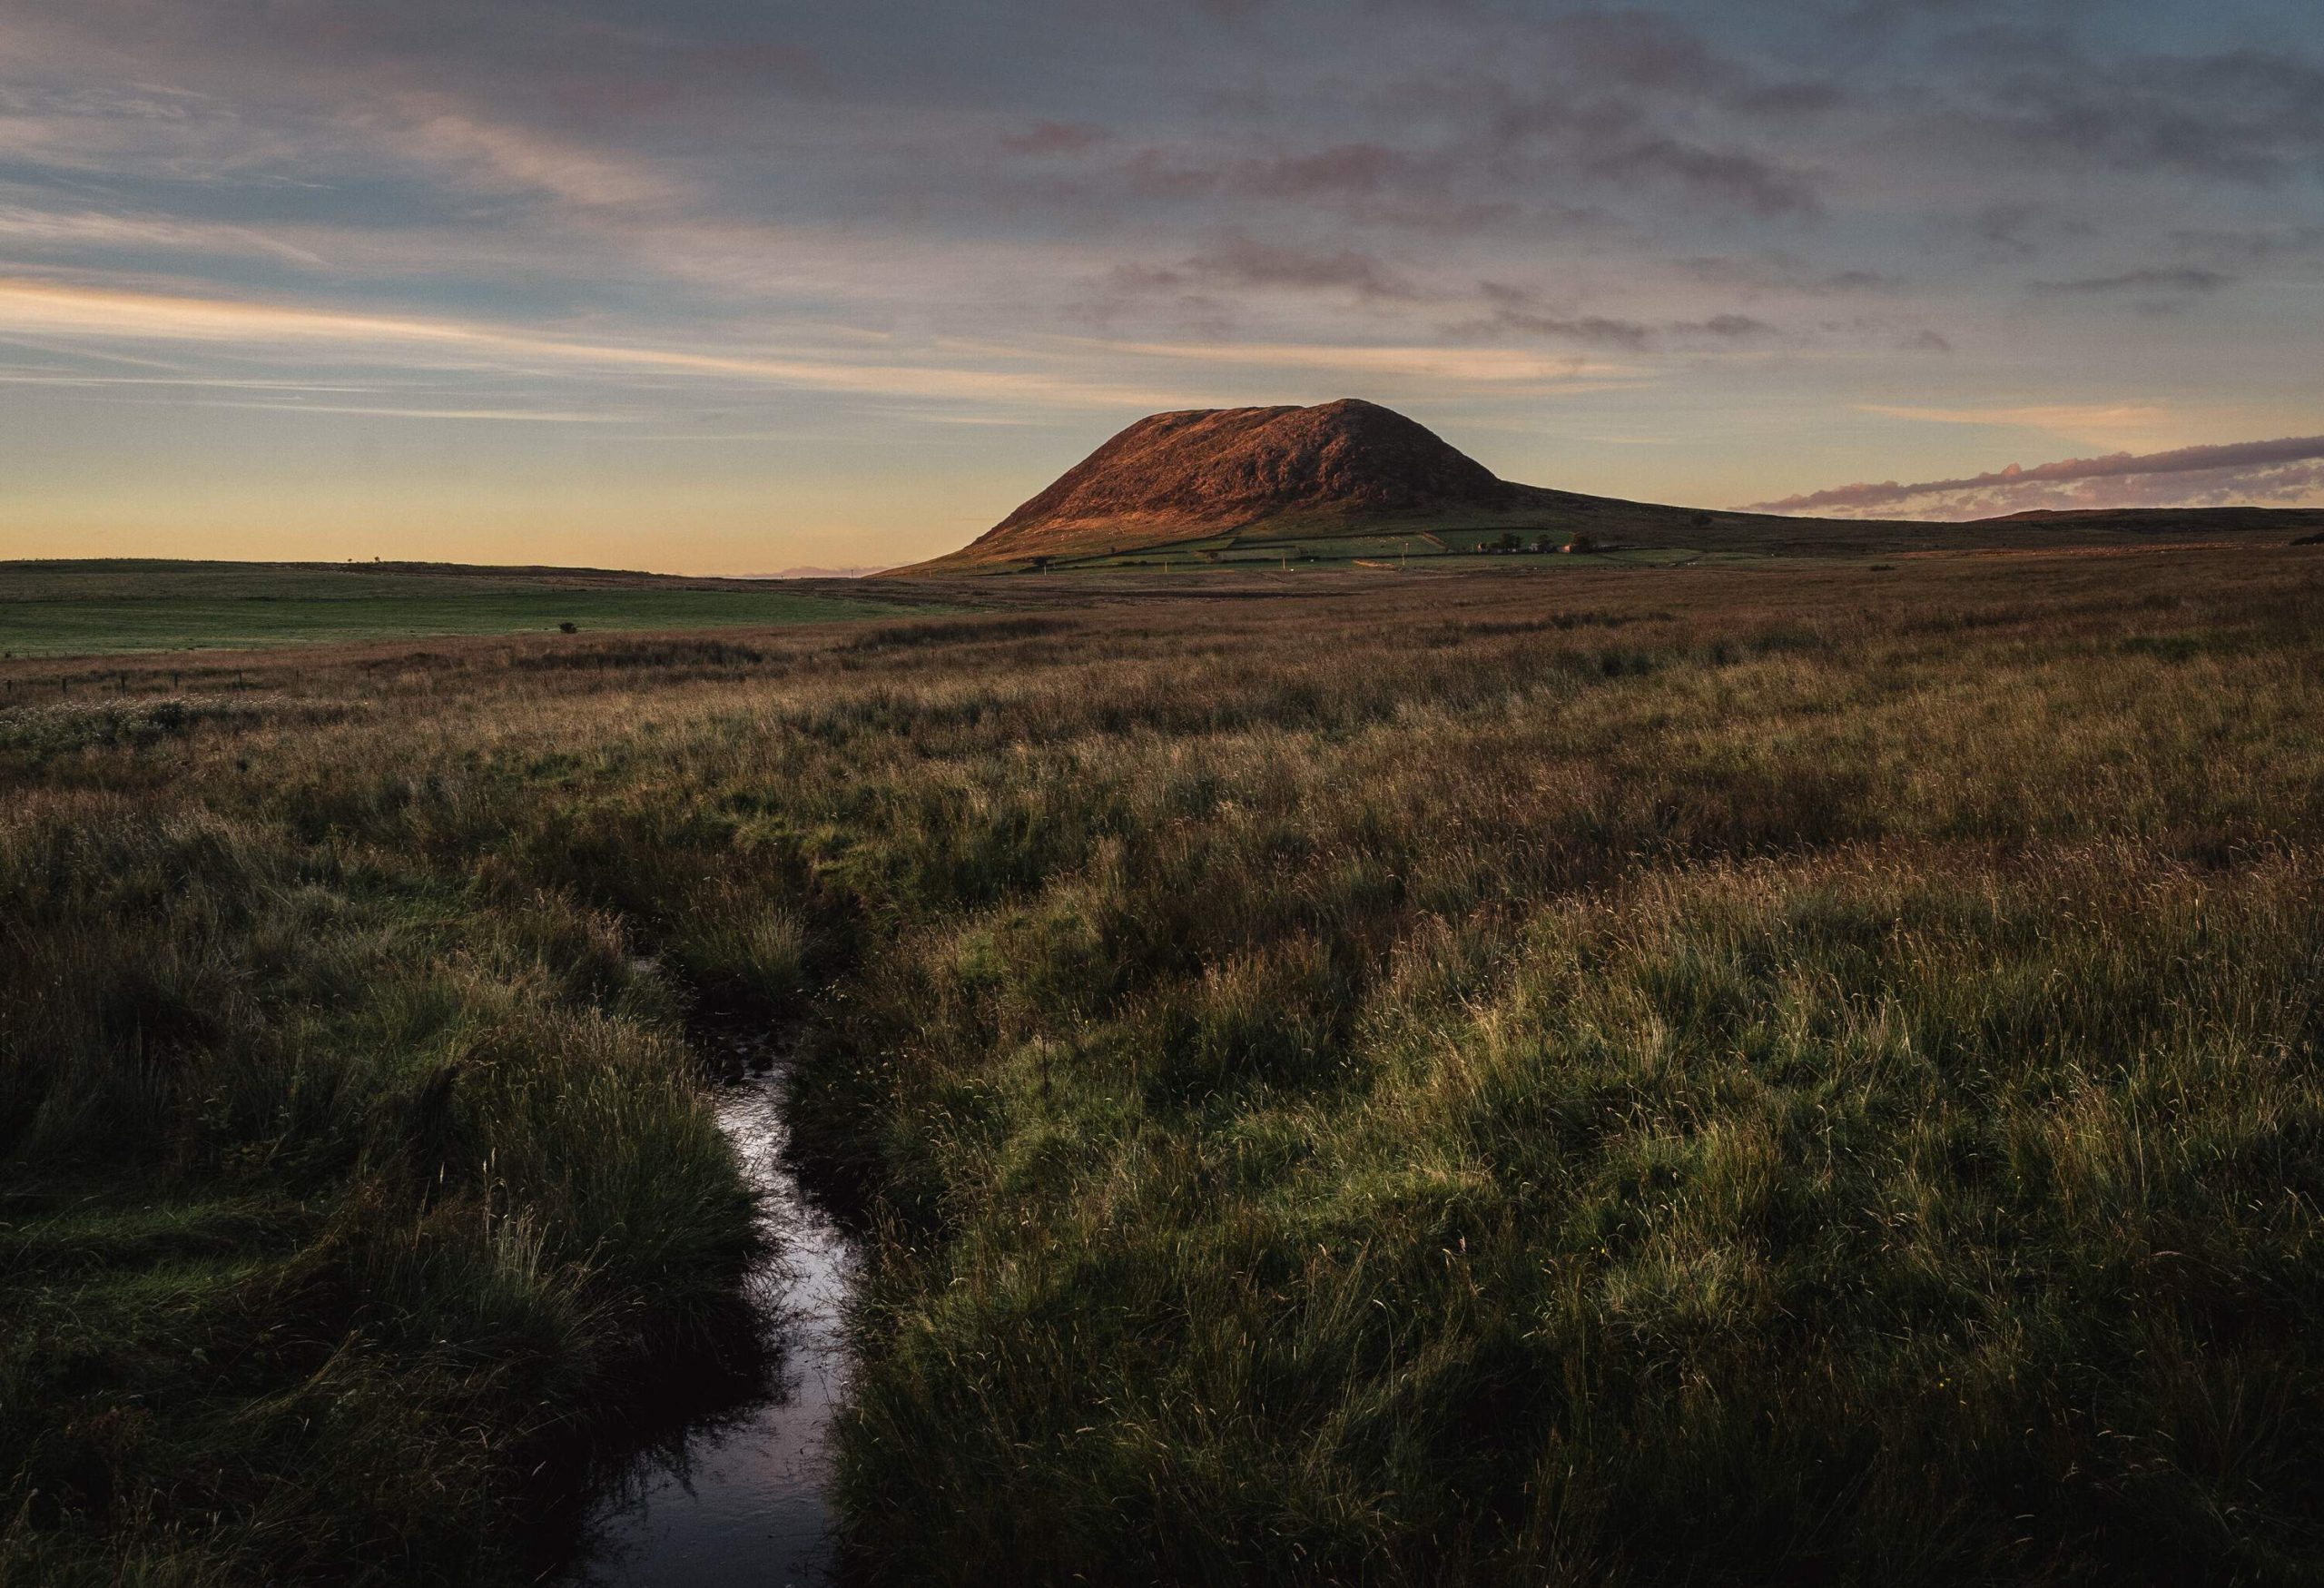 Slemish mountain on a summer evening at dusk in wide angle, with beautiful side lighting and overcast sky and a small water stream in foreground. The grass fields are bordered in distance with hand built stone walls. The mountain is a popular tourist attraction, and for walking. St. Patrick tended sheep there as a young man. The mountain is actually the plug of an extinct volcano.